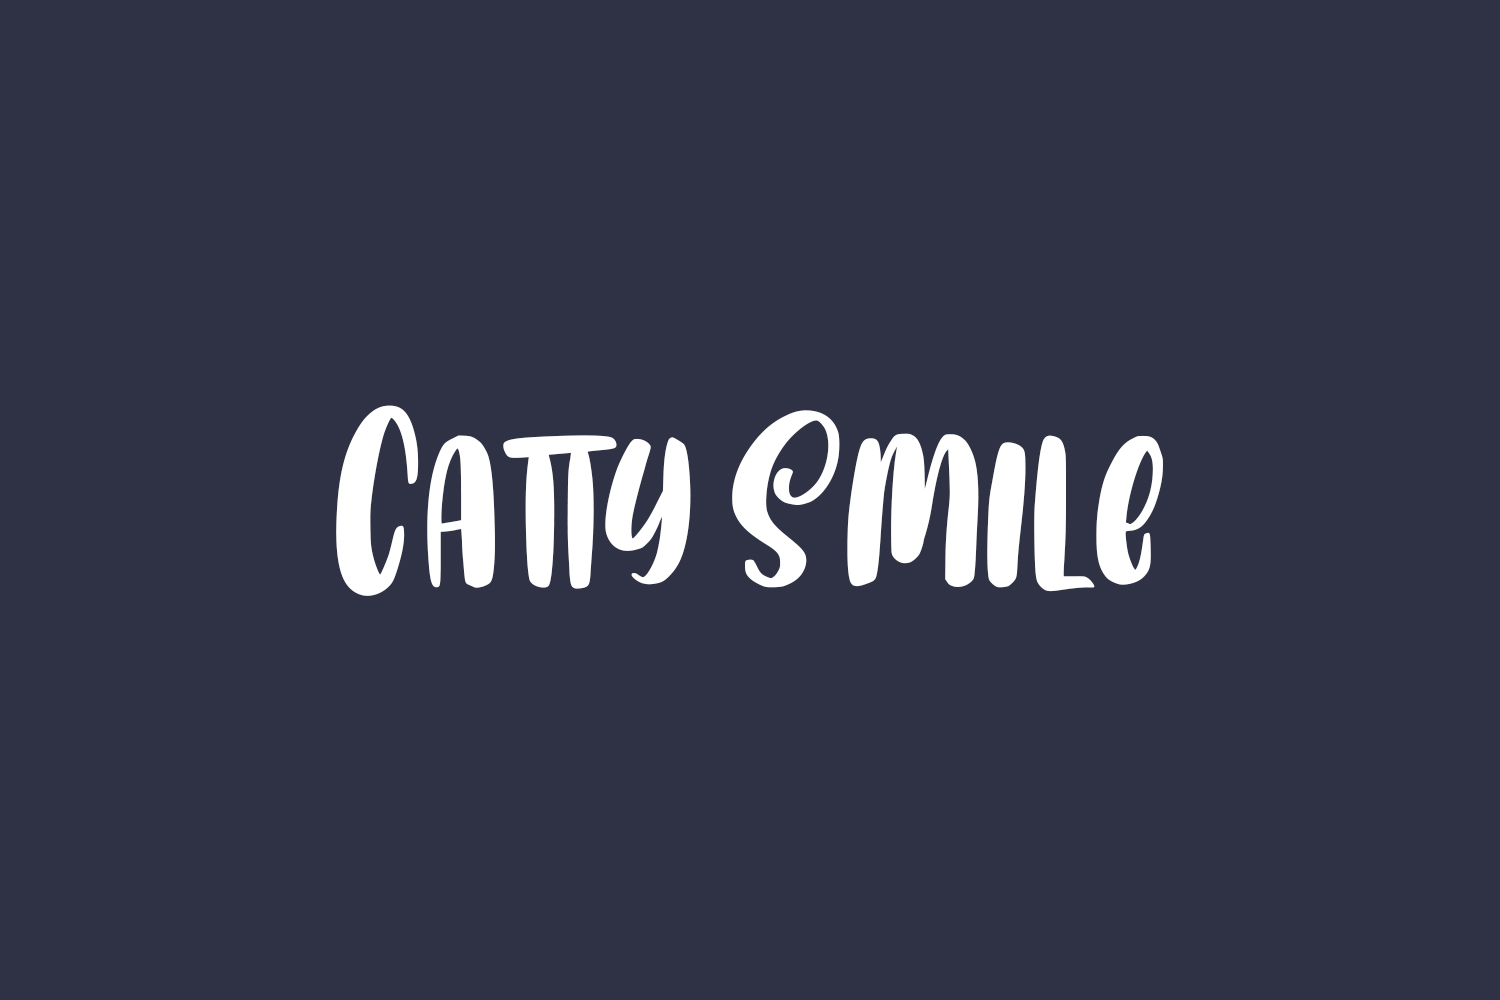 Catty Smile Free Font